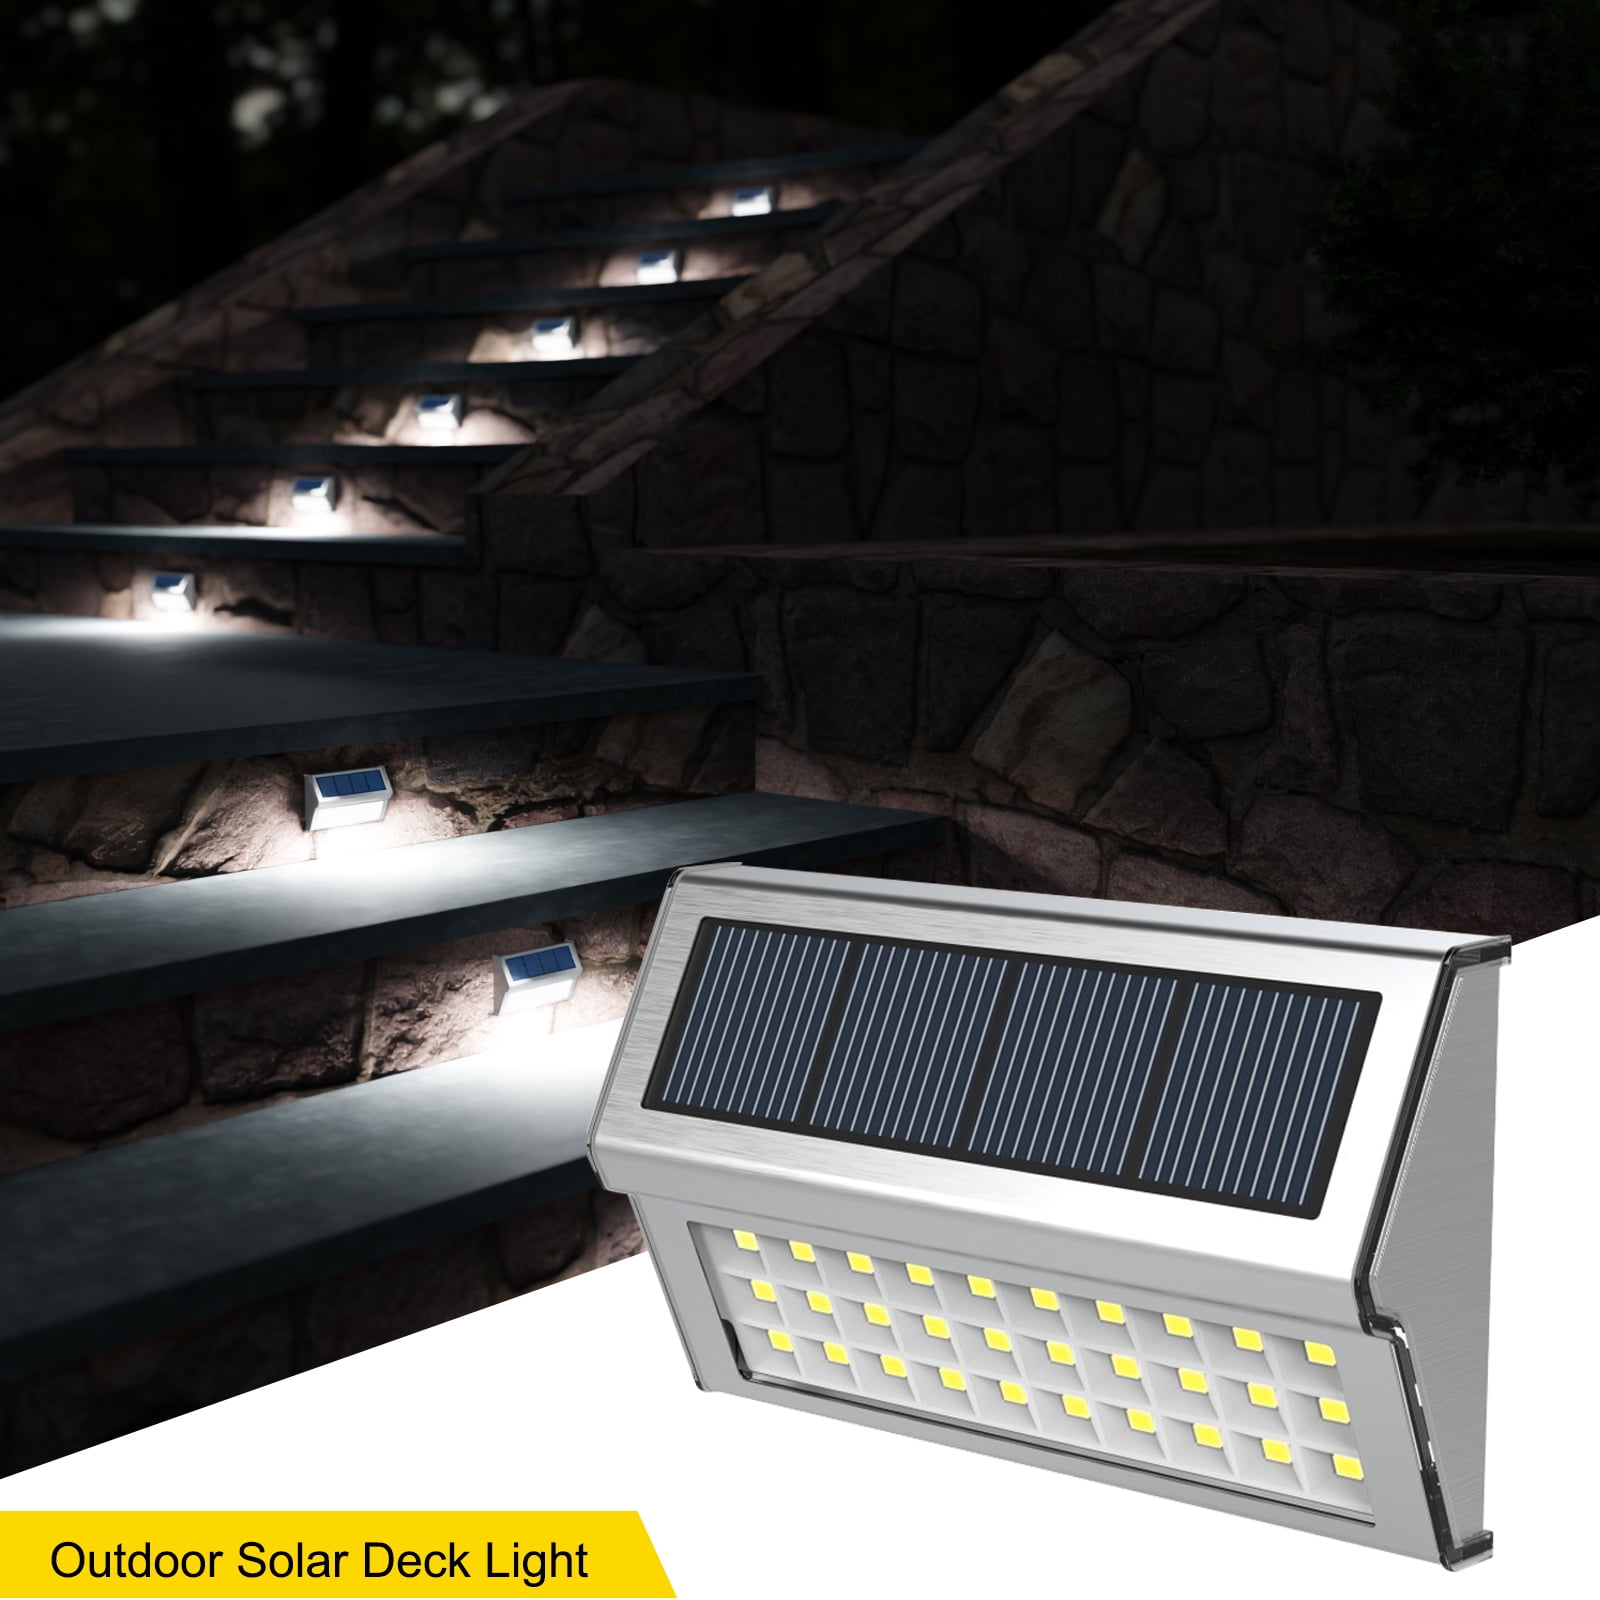 JSOT Outdoor Solar Gutter Lights Solar Powered Fence Light Waterproof LED Wall Lamps for Roof Eaves Railing Deck Stairs Corridor Pack of 4 White Light 